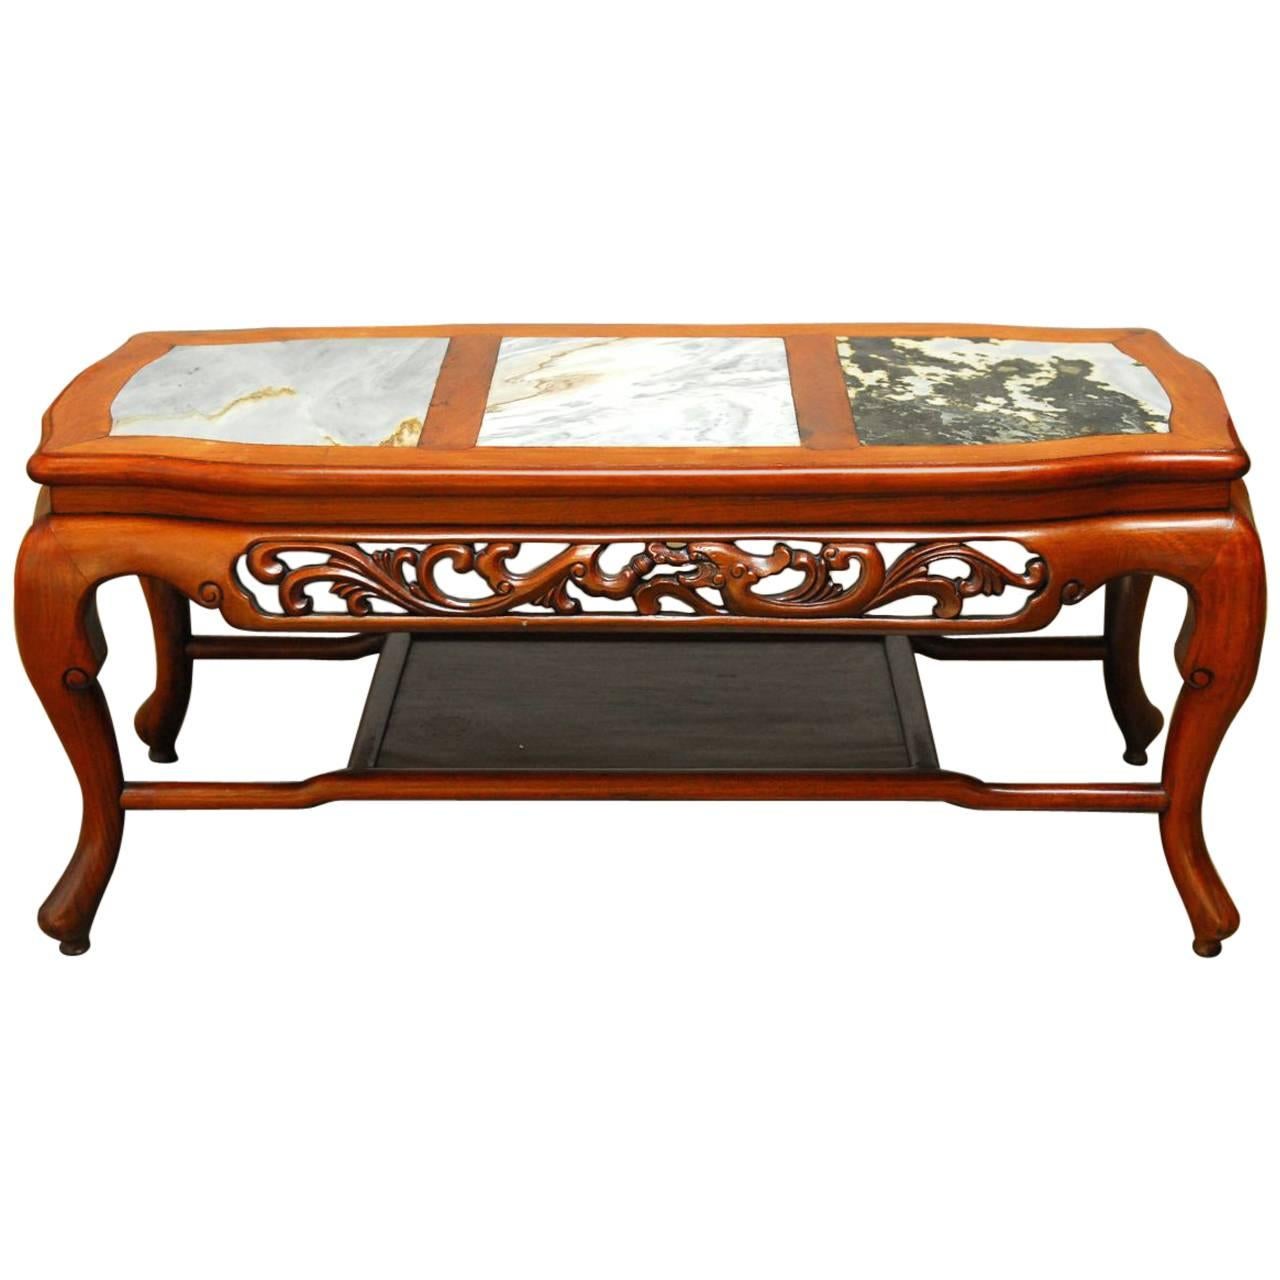 Chinese Rosewood and Marble Dali Panel Coffee Table